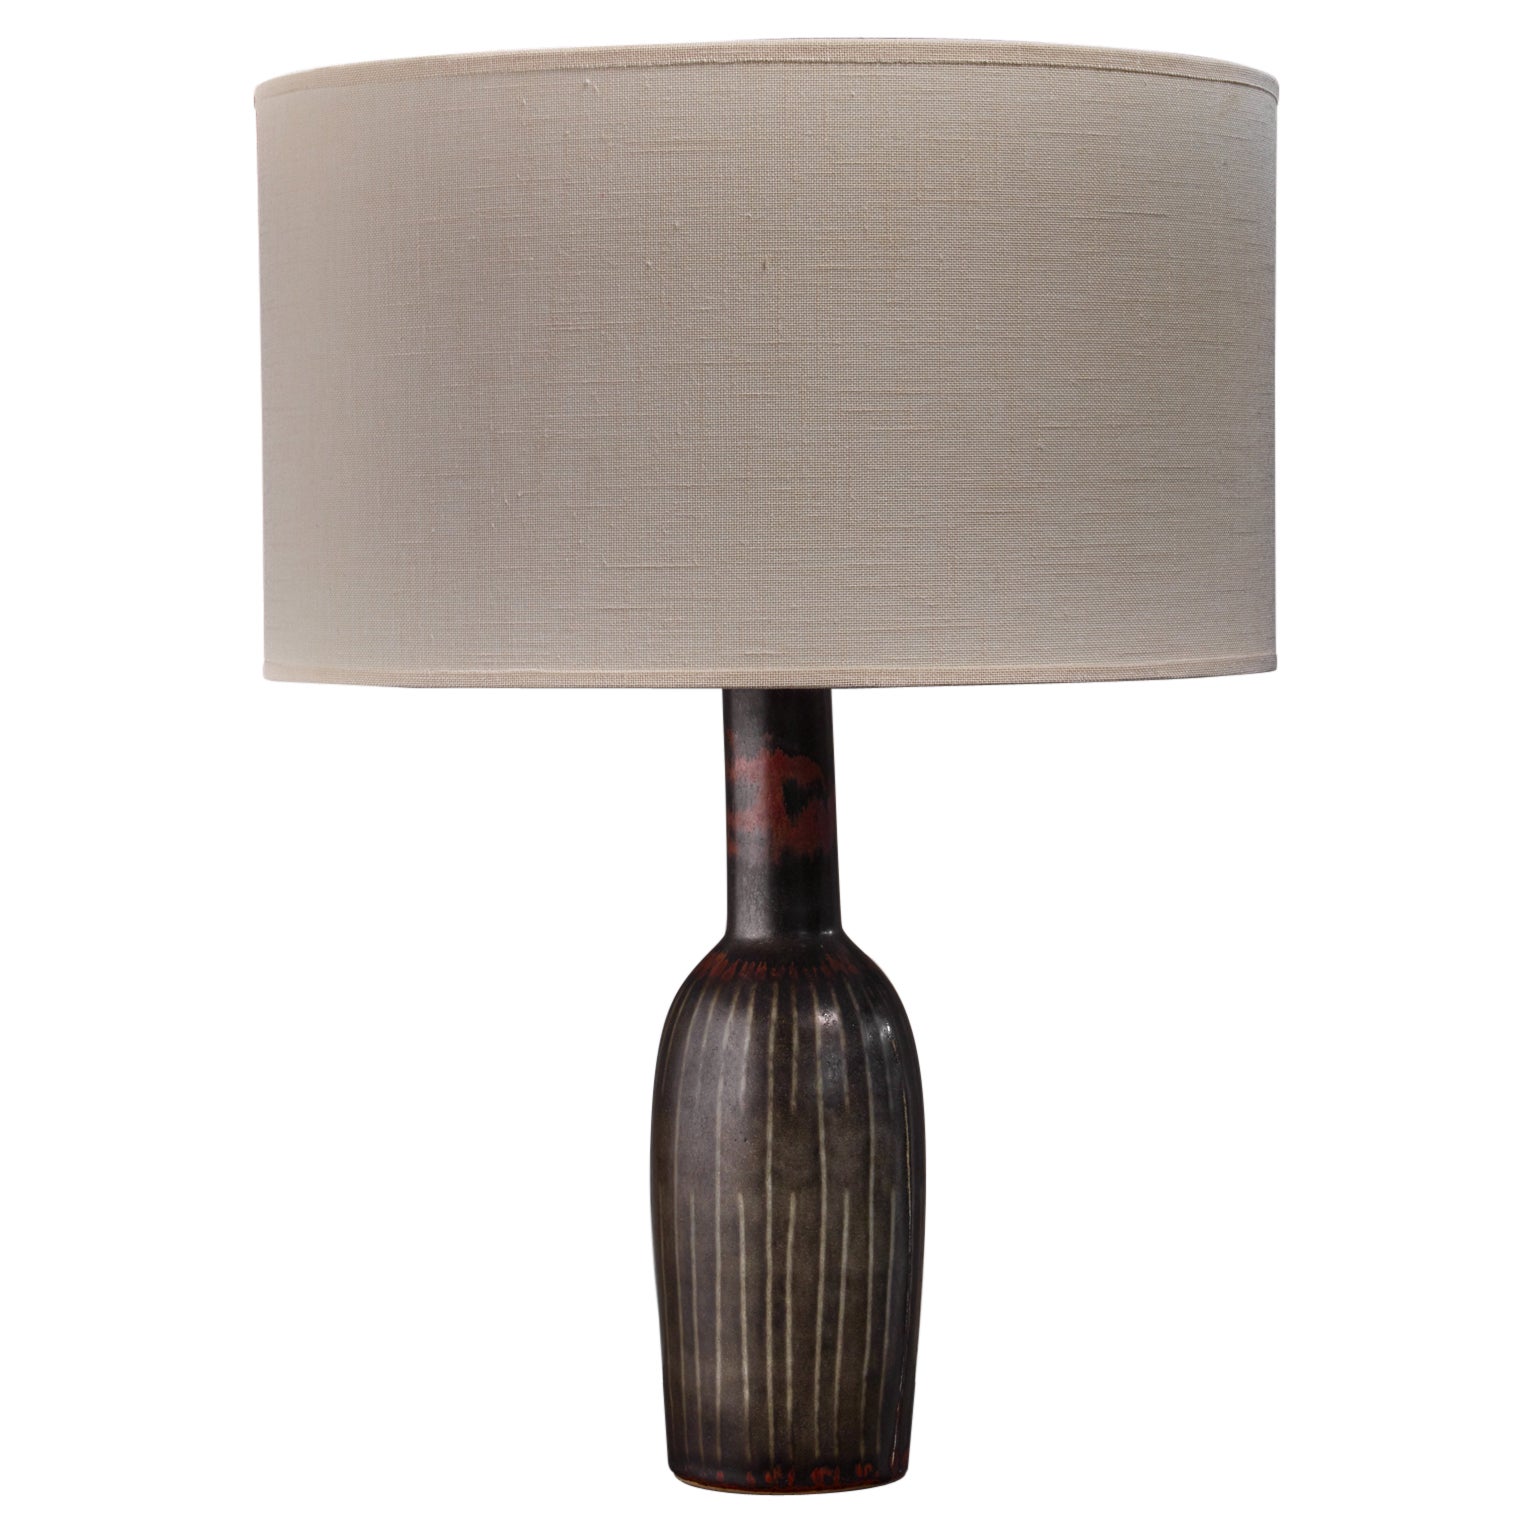 Carl-Harry Stalhane Ceramic Table Lamp For Sale